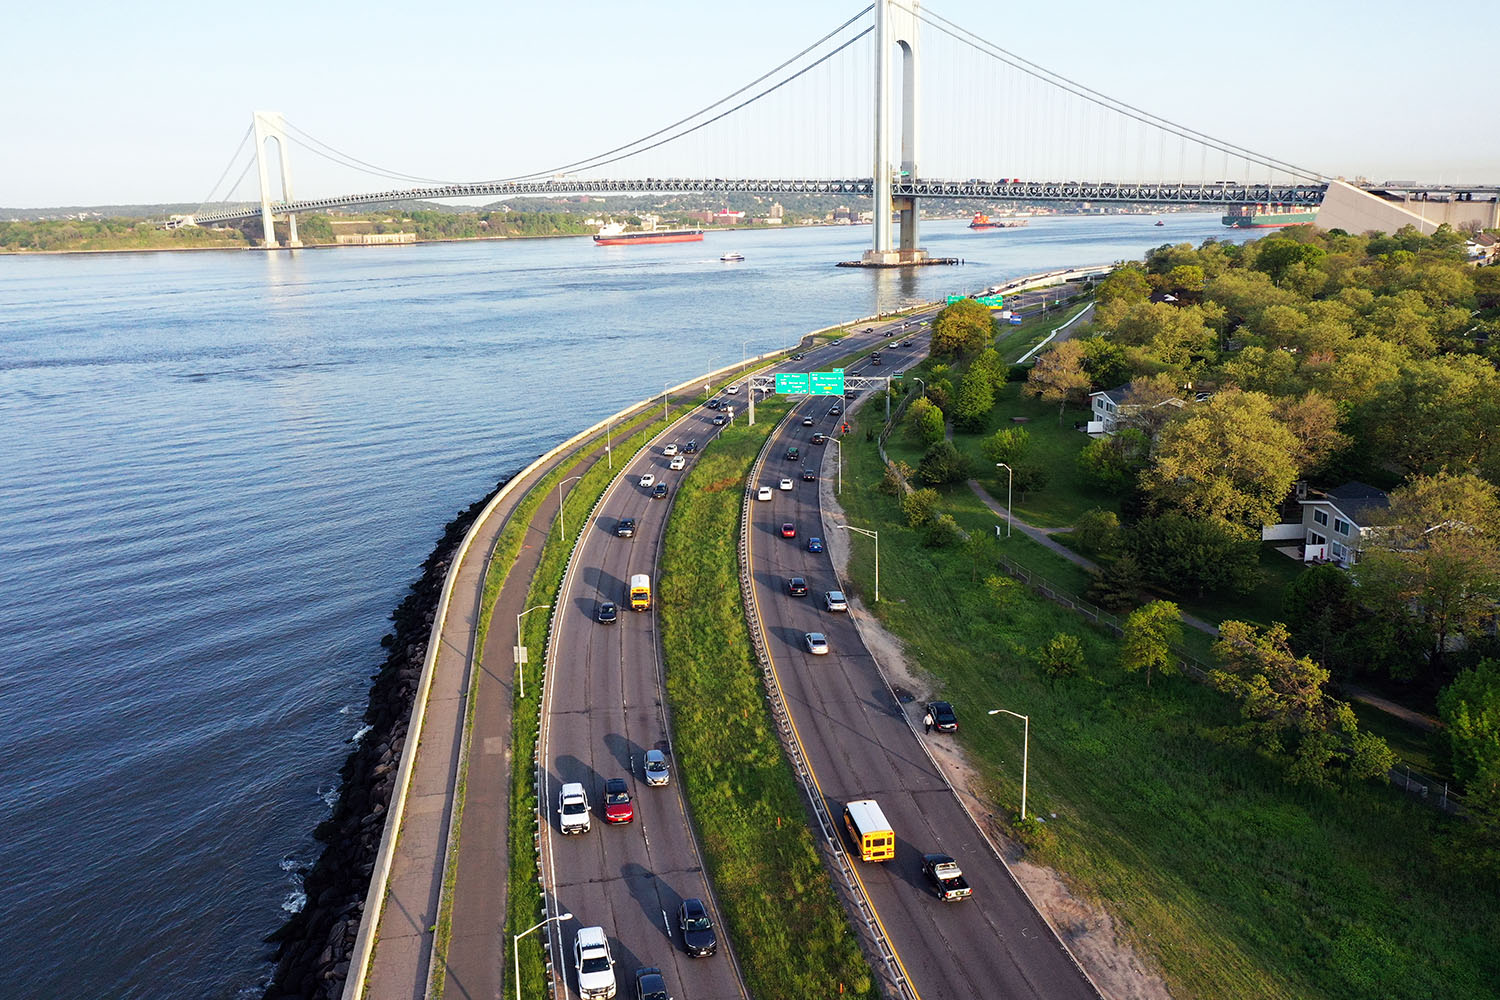 An aerial view of the Belt Parkway and distant Verrazzano Bridge at sunrise